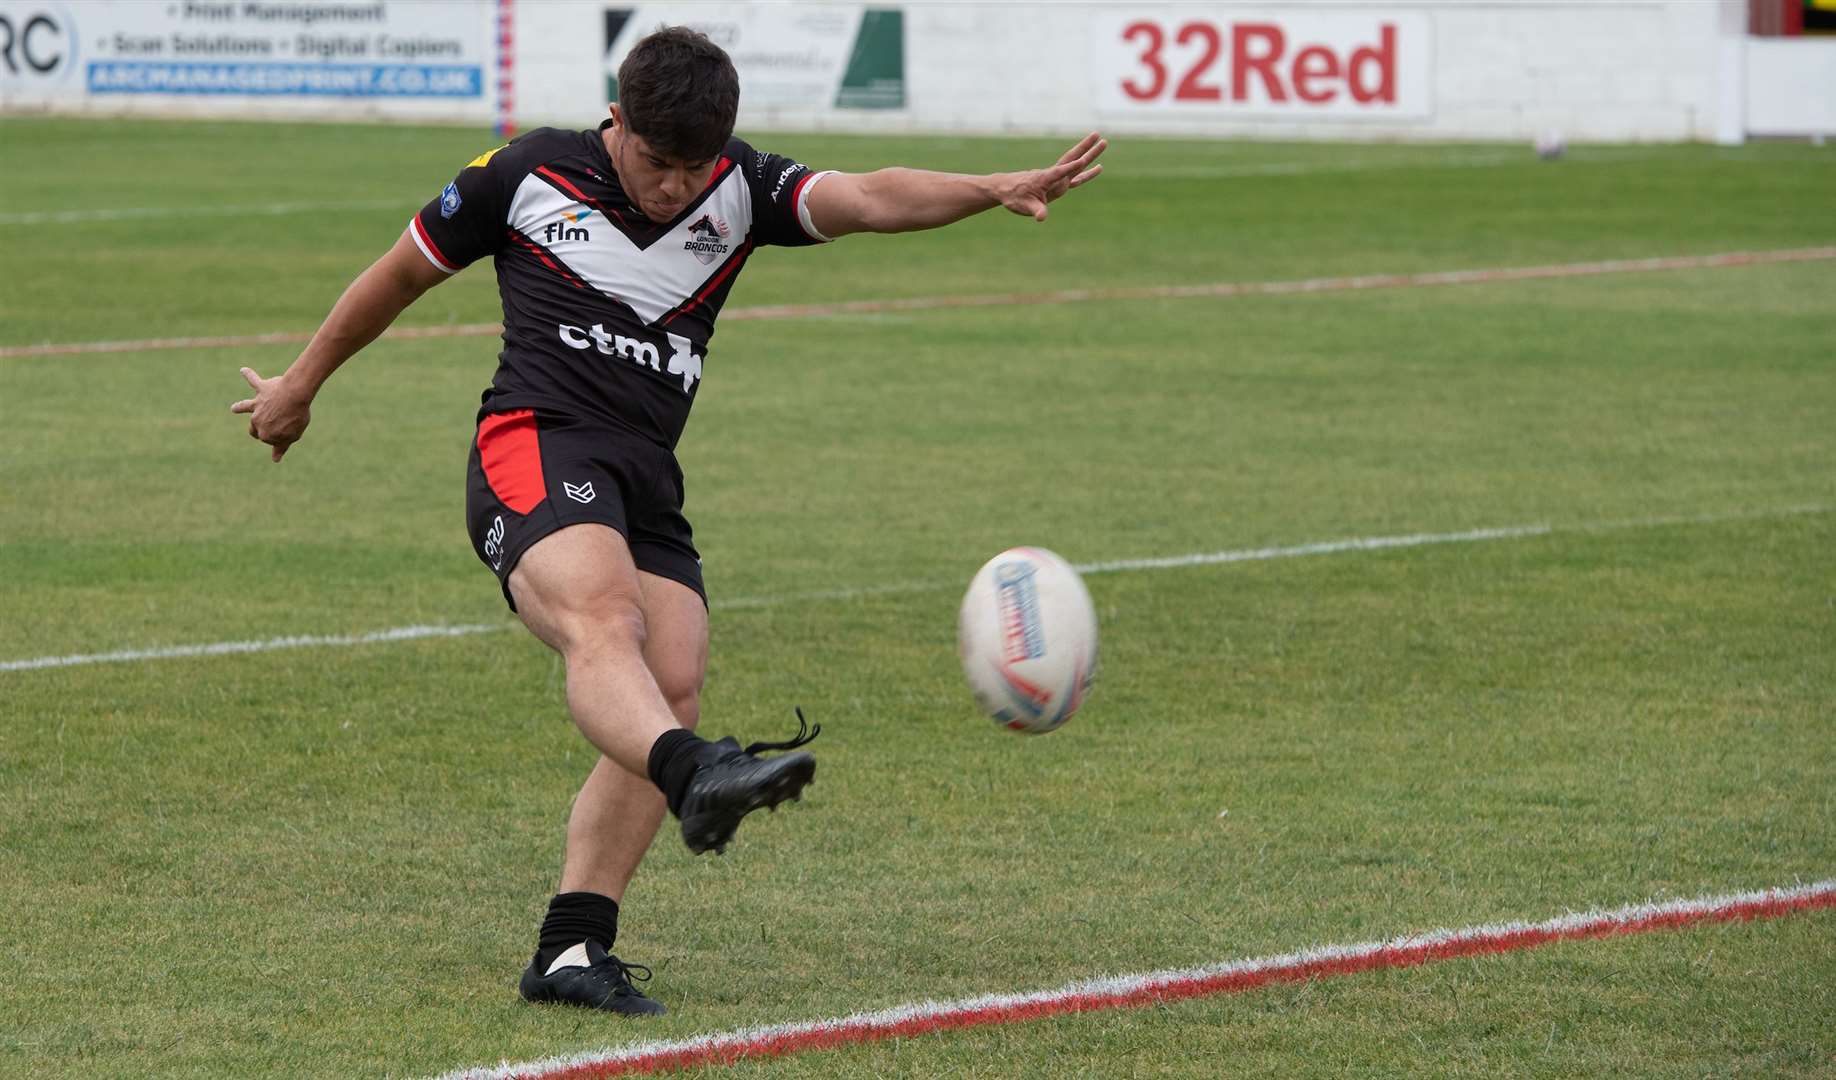 Oliver Leyland of London Broncos warming up ahead of the match against Sheffield Eagles at Kuflink Stadium Picture: Alan Stanford